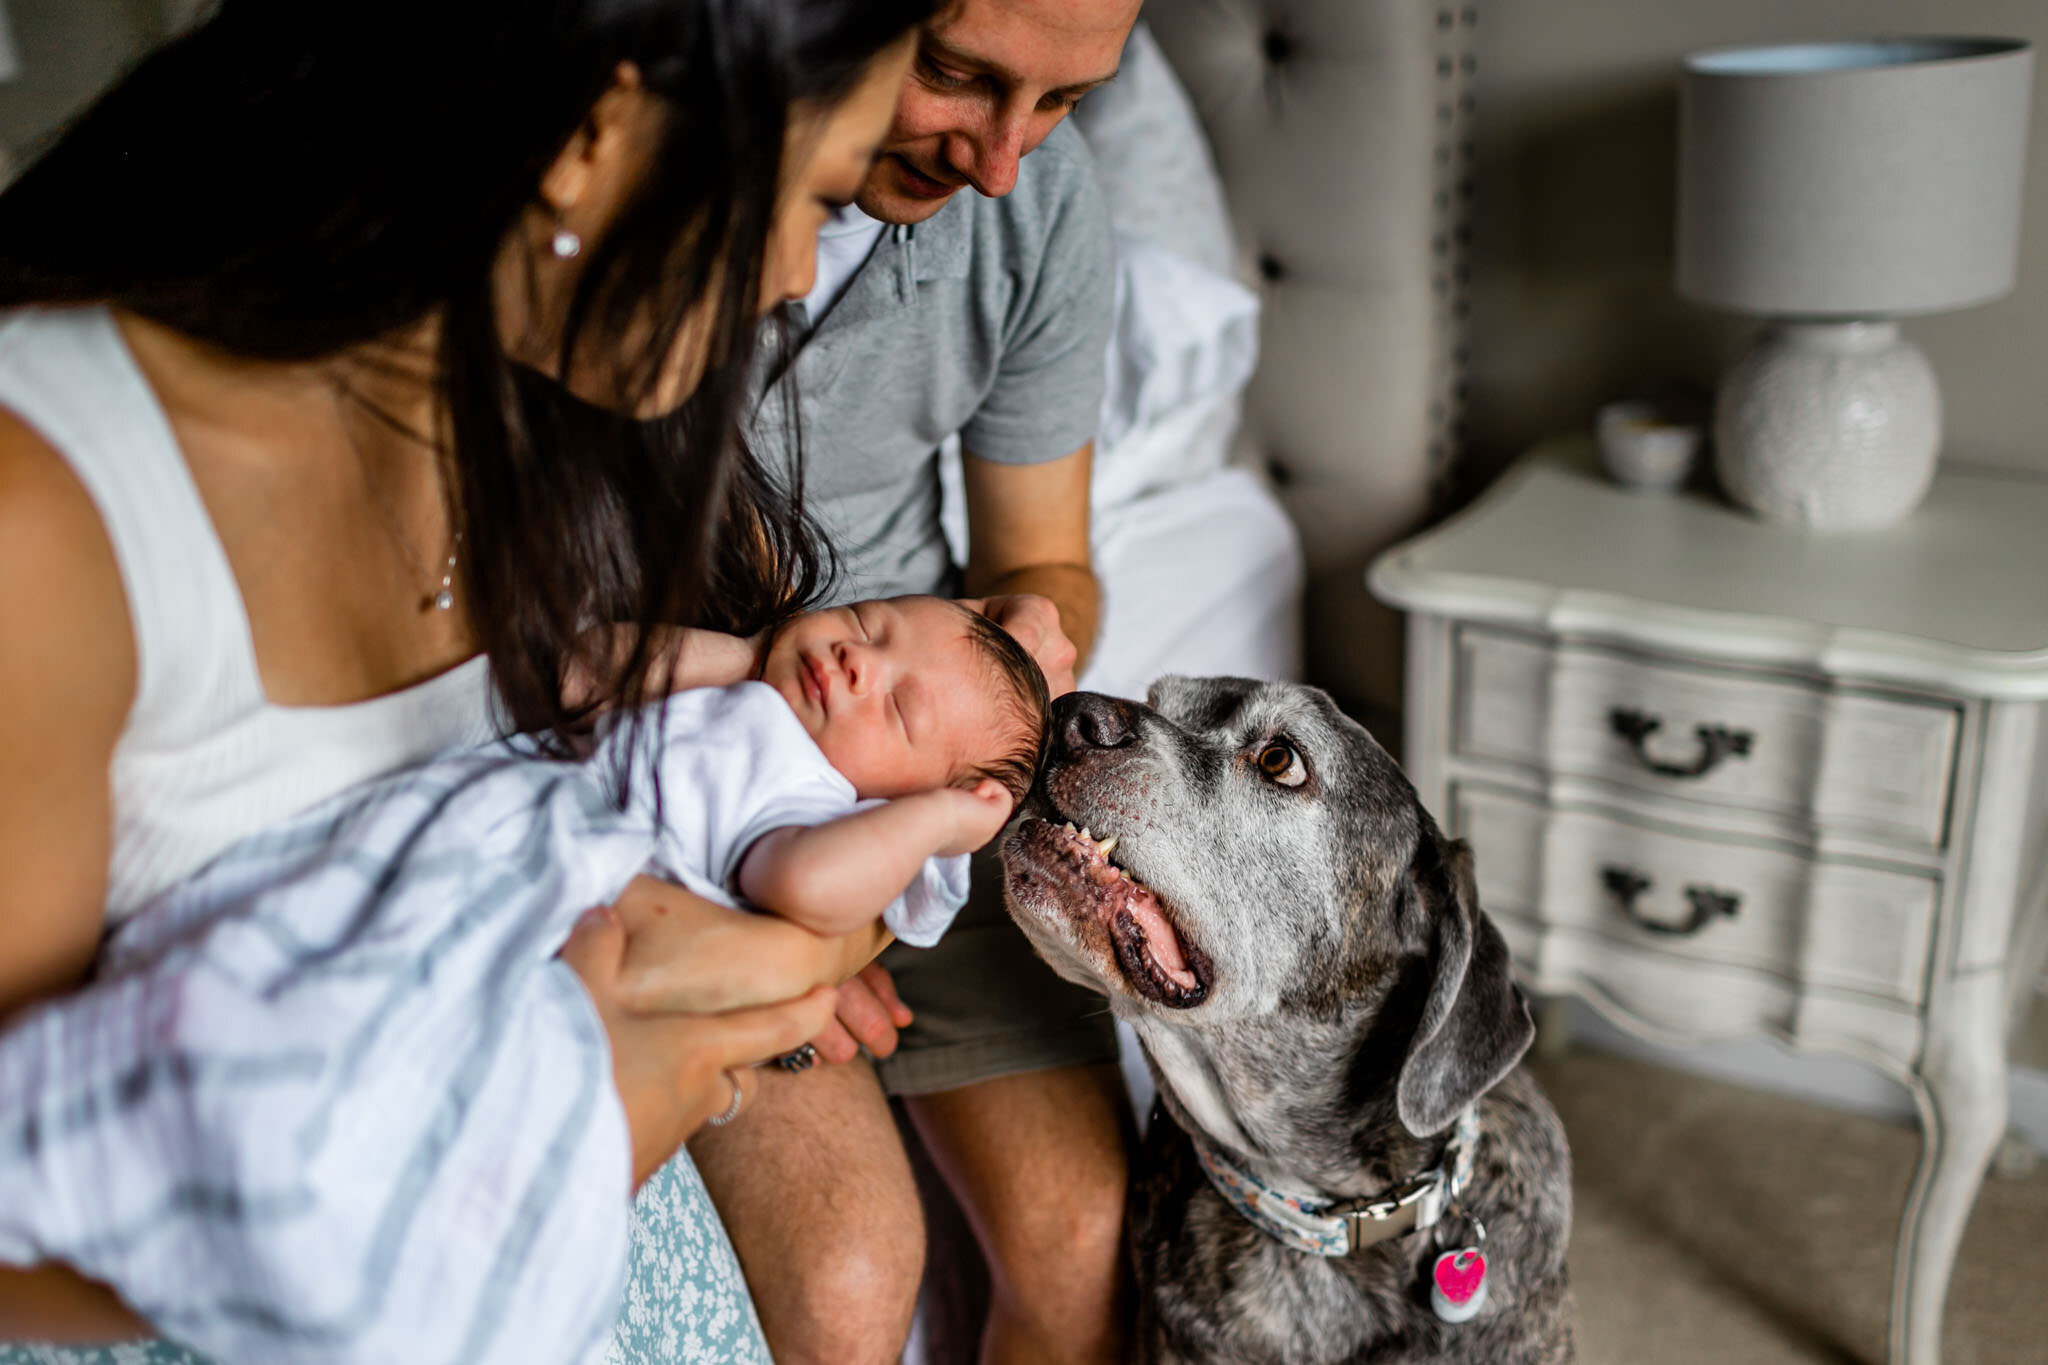 Candid photo of dog licking baby | Durham Newborn Photographer | By G. Lin Photography